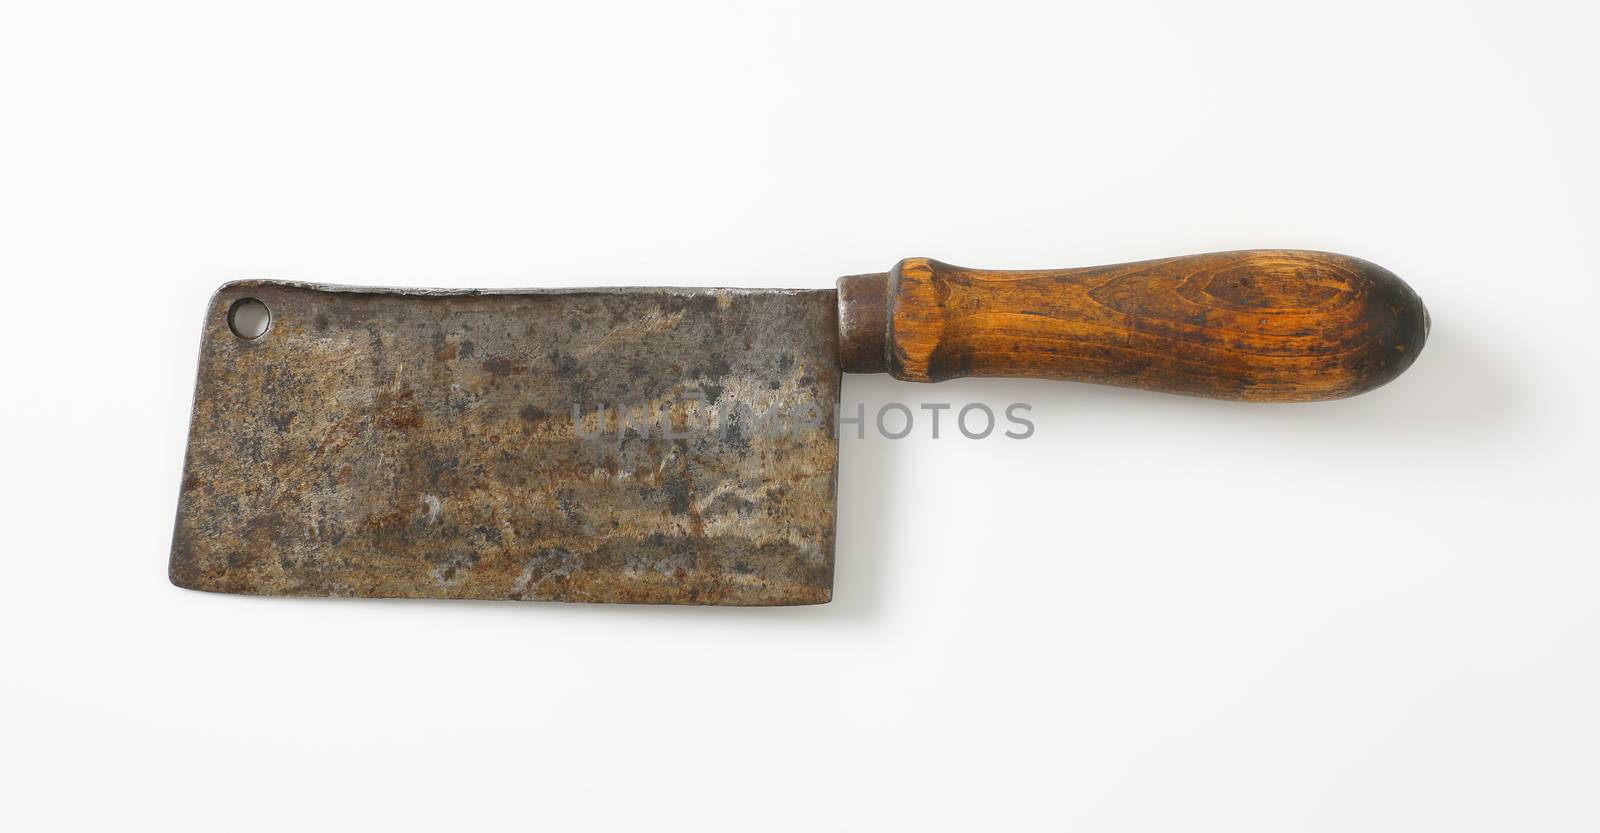 Old wood-handled meat cleaver by Digifoodstock